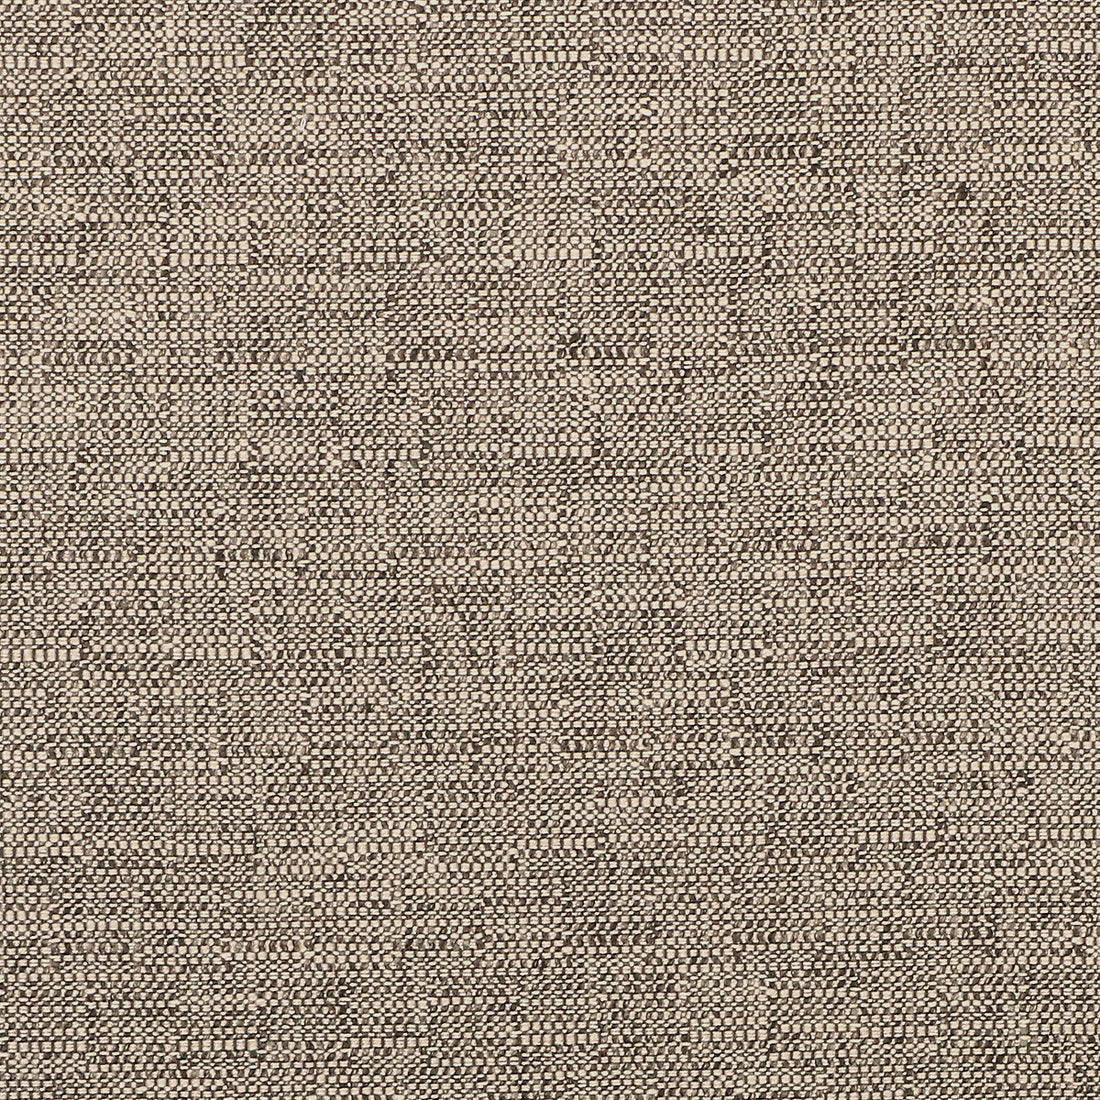 Kravet Smart fabric in 35518-616 color - pattern 35518.616.0 - by Kravet Smart in the Inside Out Performance Fabrics collection